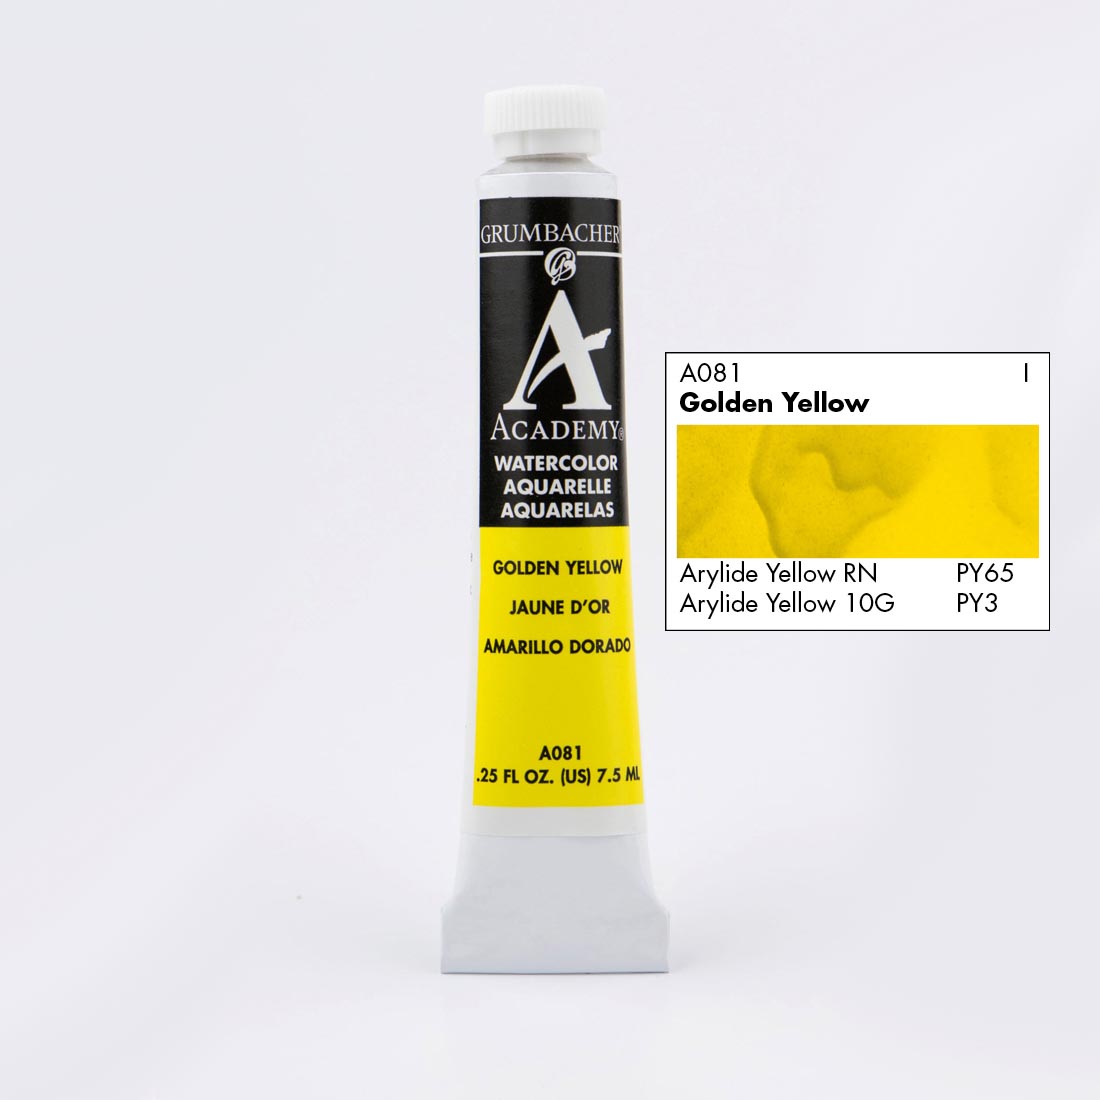 Tube of Grumbacher Academy Watercolor beside Golden Yellow color swatch